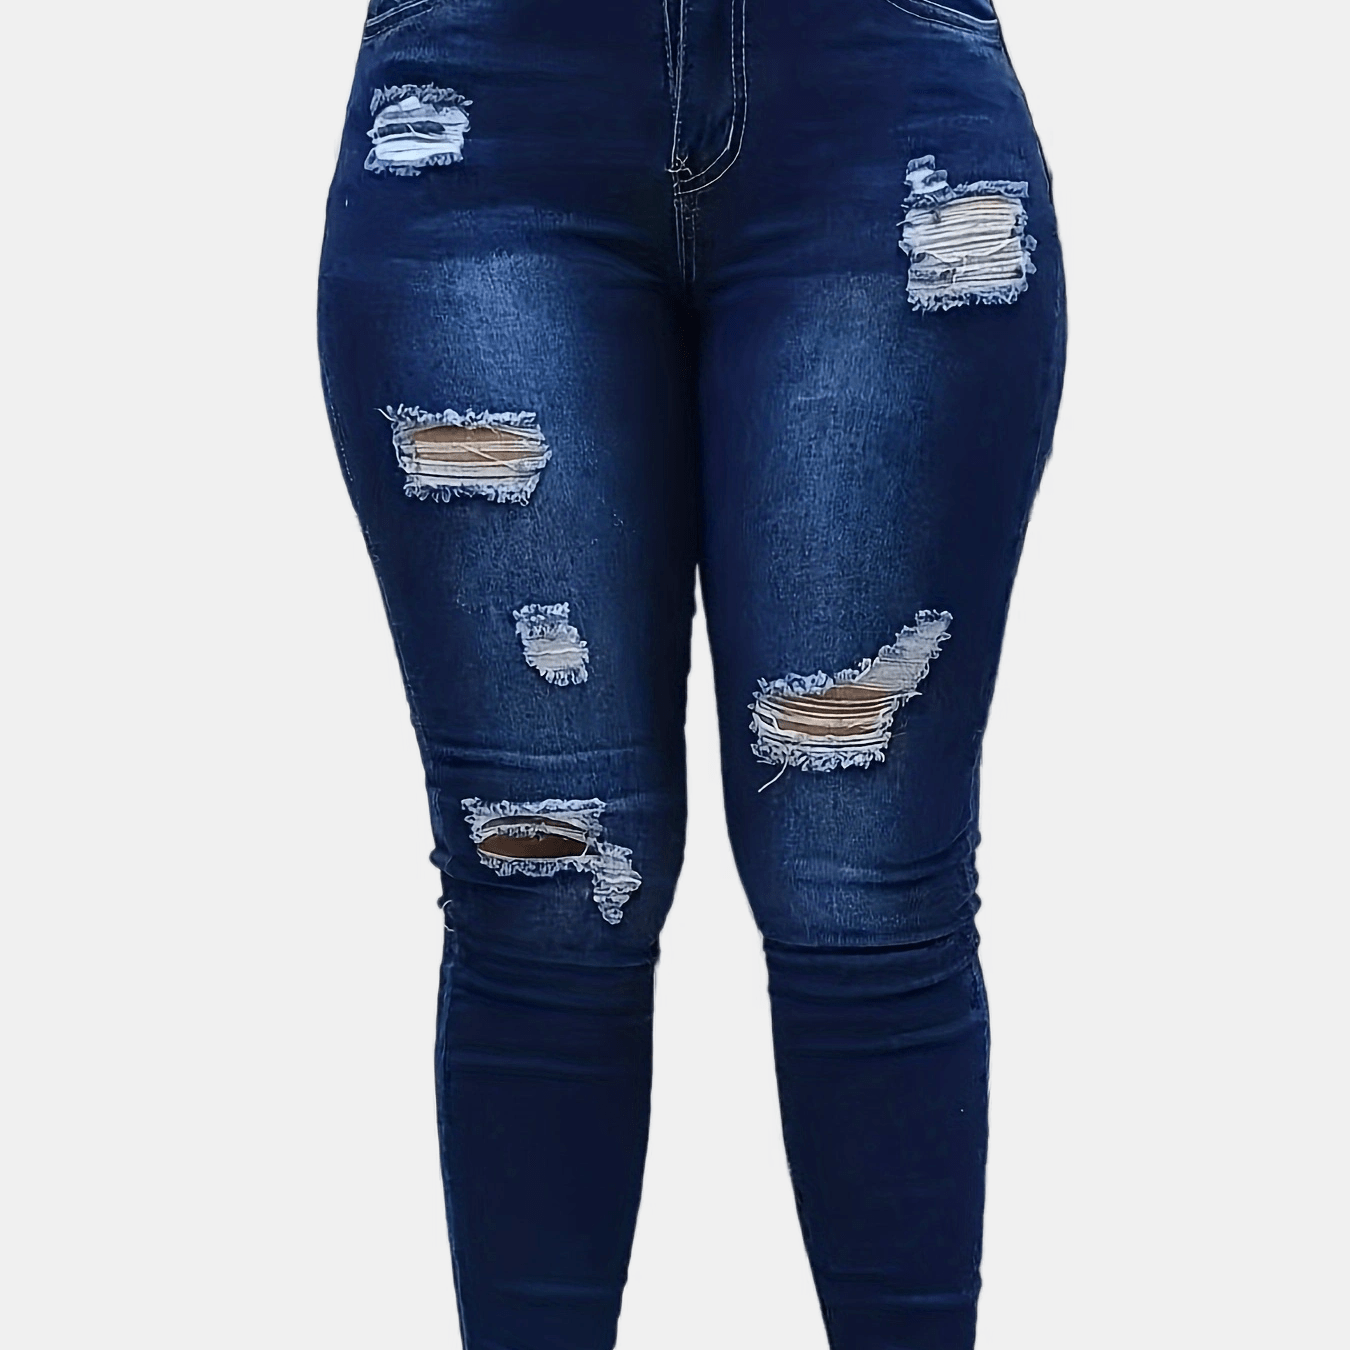 

Ripped High Stretch Skinny Fit Jeans, Plain Distressed Hot Denim Pants, Women's Denim Jeans & Clothing